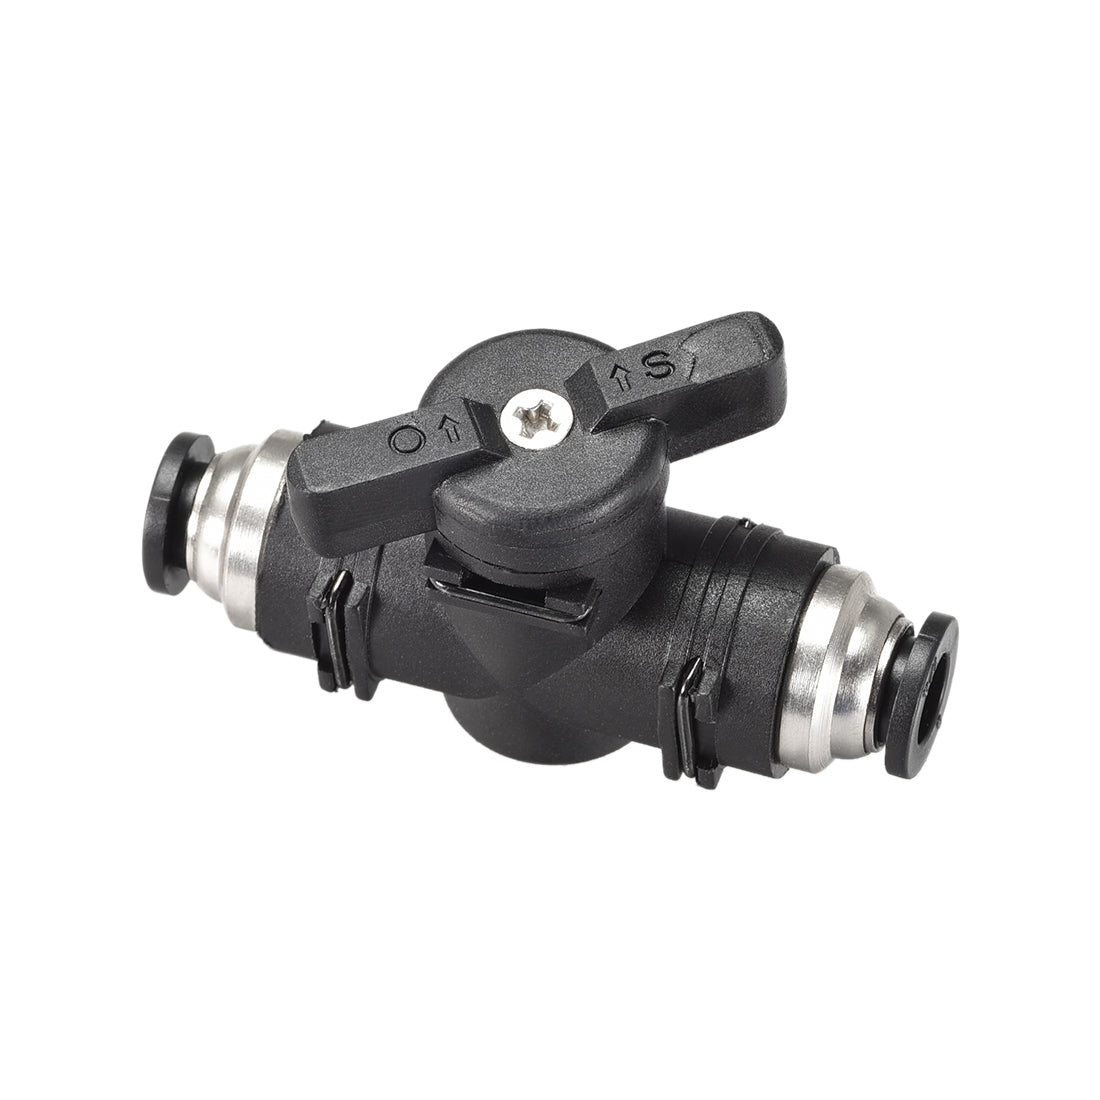 uxcell Uxcell Pneumatic Ball Valve, Push To Connect, 6mm Inner Diameter, for Air Flow Control, Plastic Zinc Alloy Black